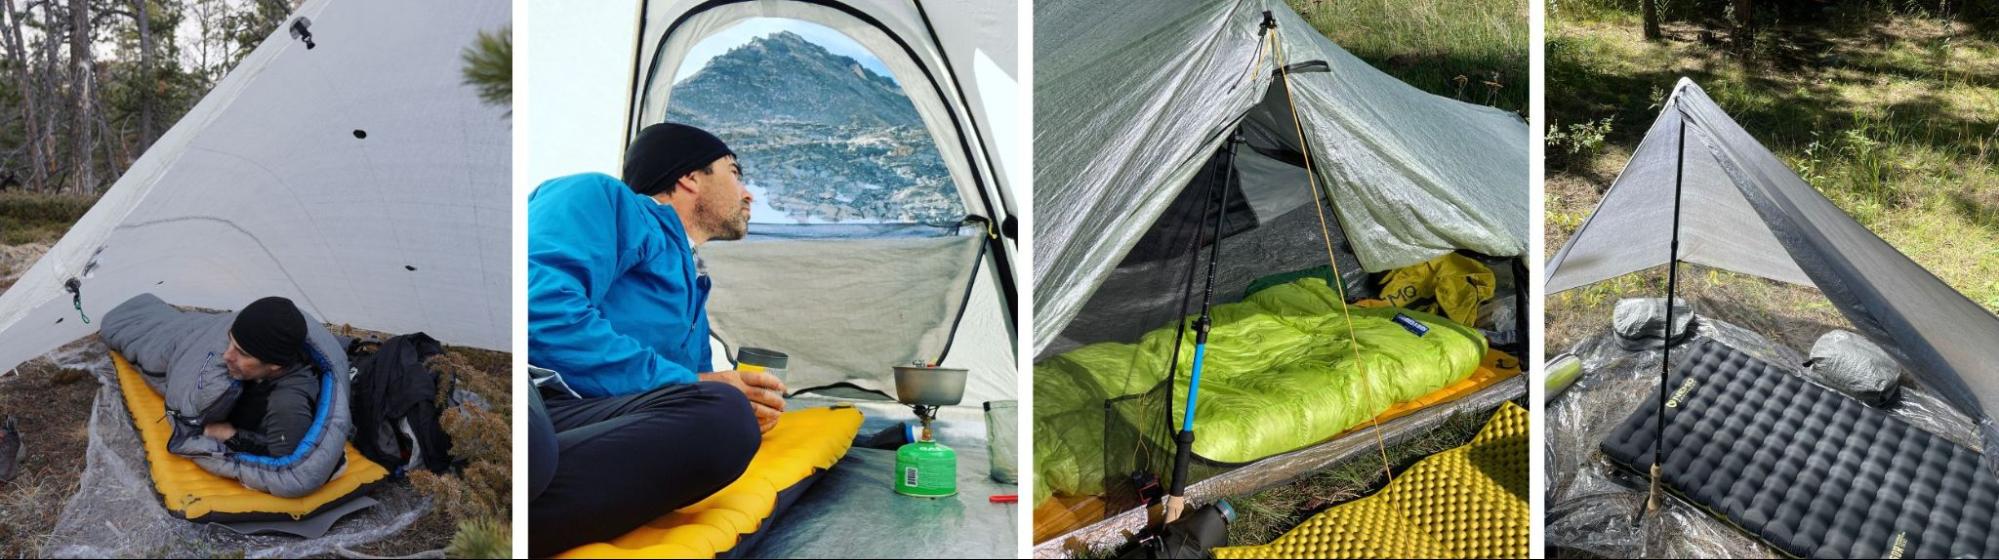 a man sitting inside of a tent next to a sleeping bag